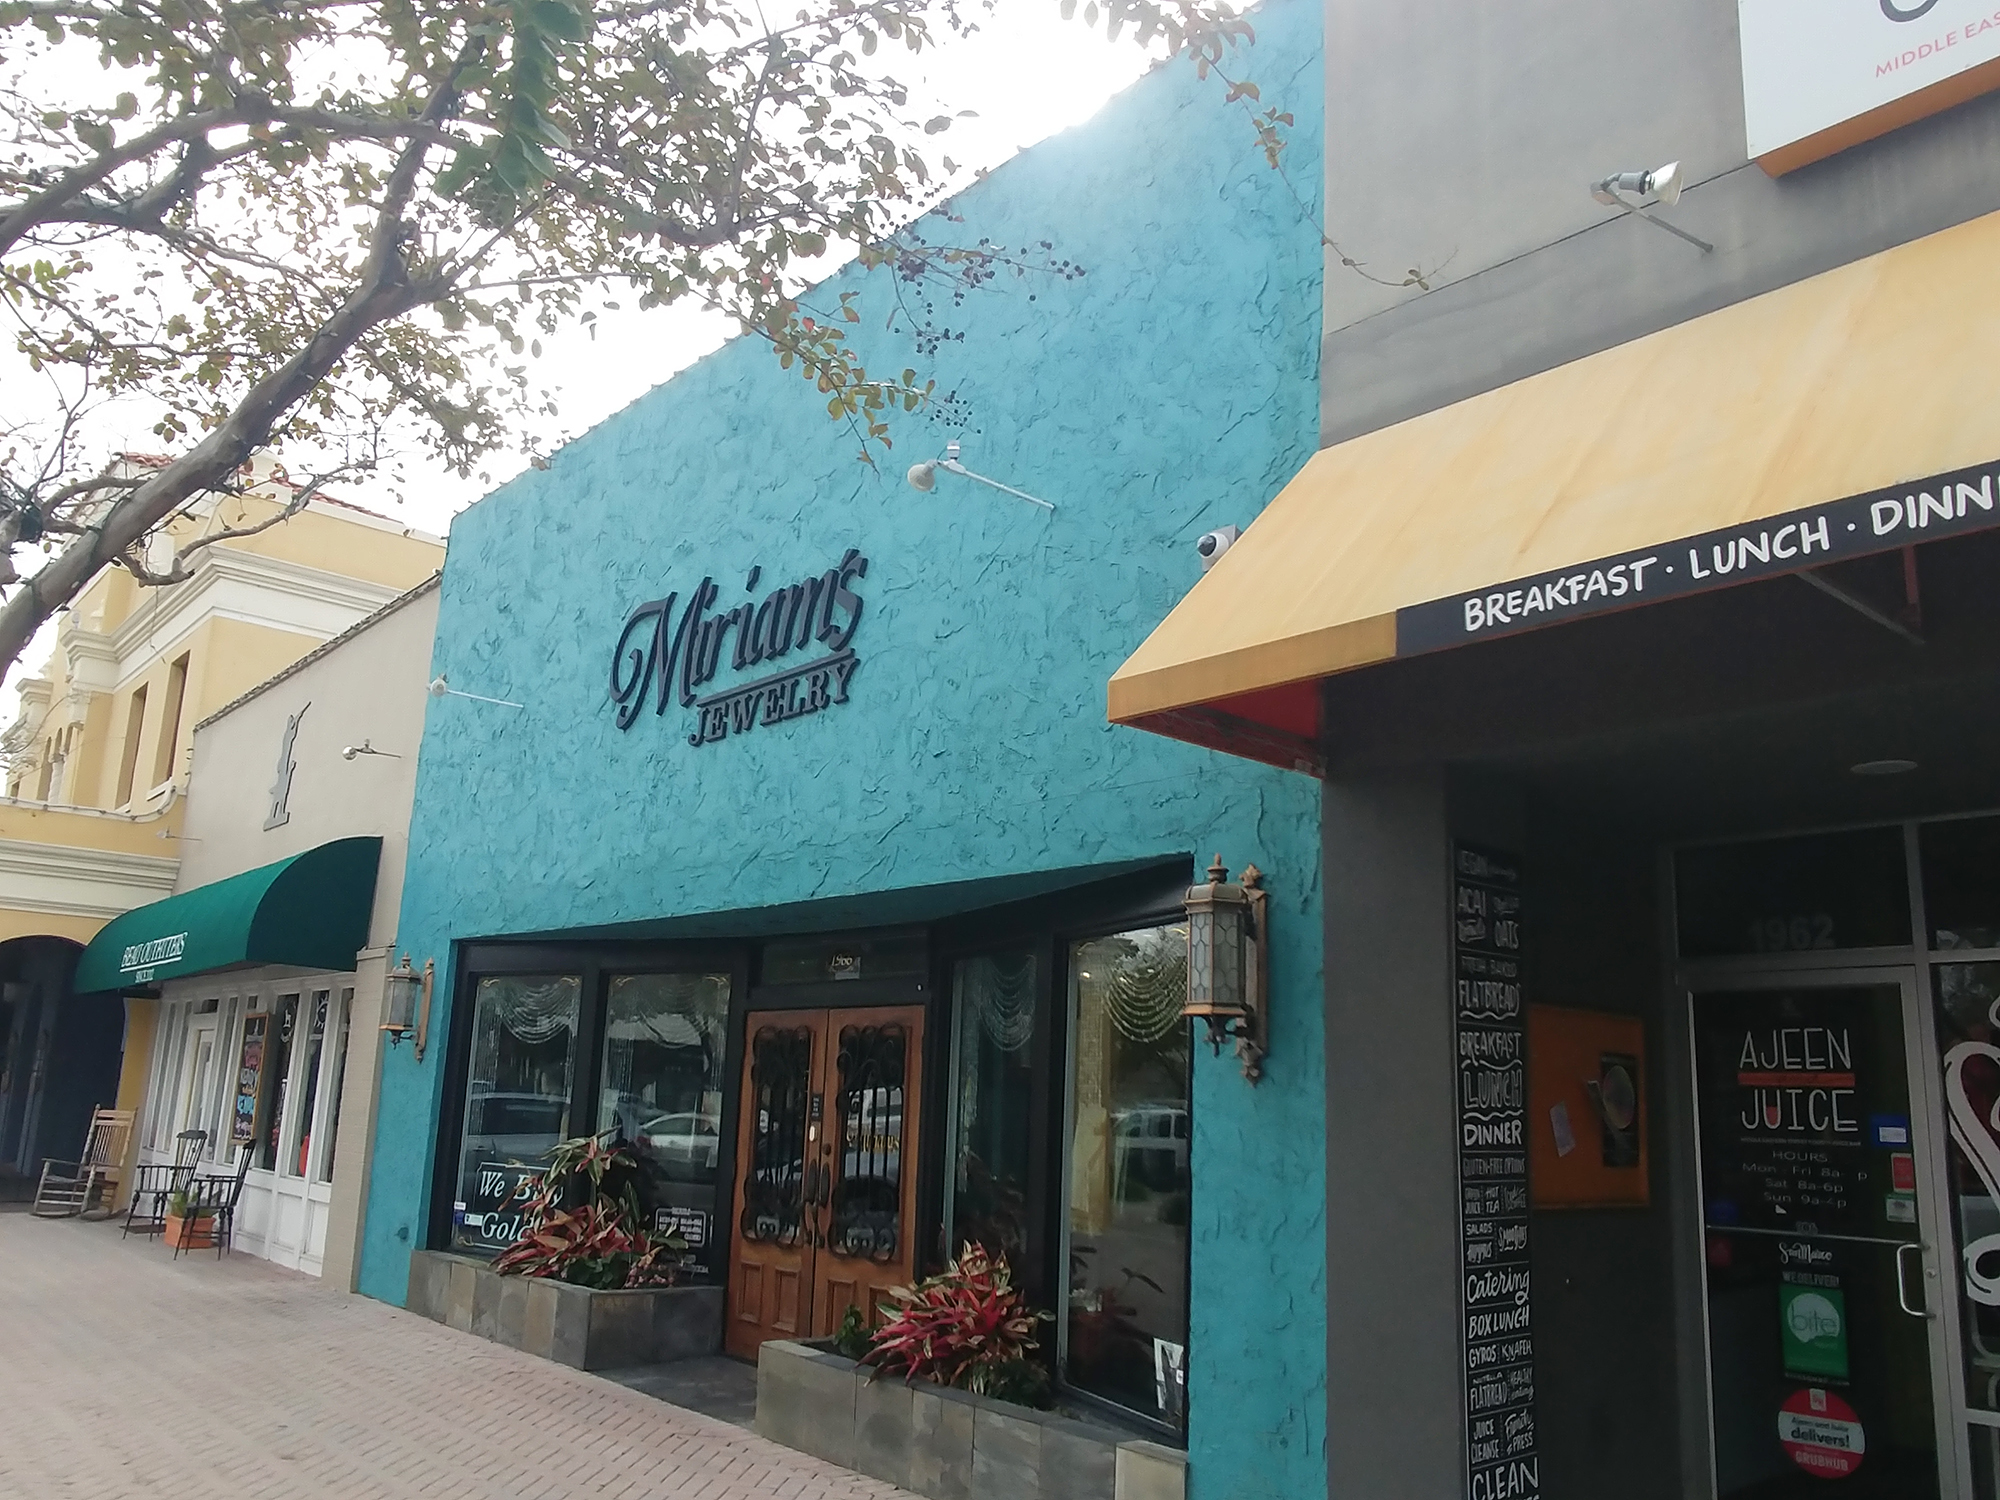 Miriam’s Jewelry occupies one of four retail spaces in the San Marco Square building.